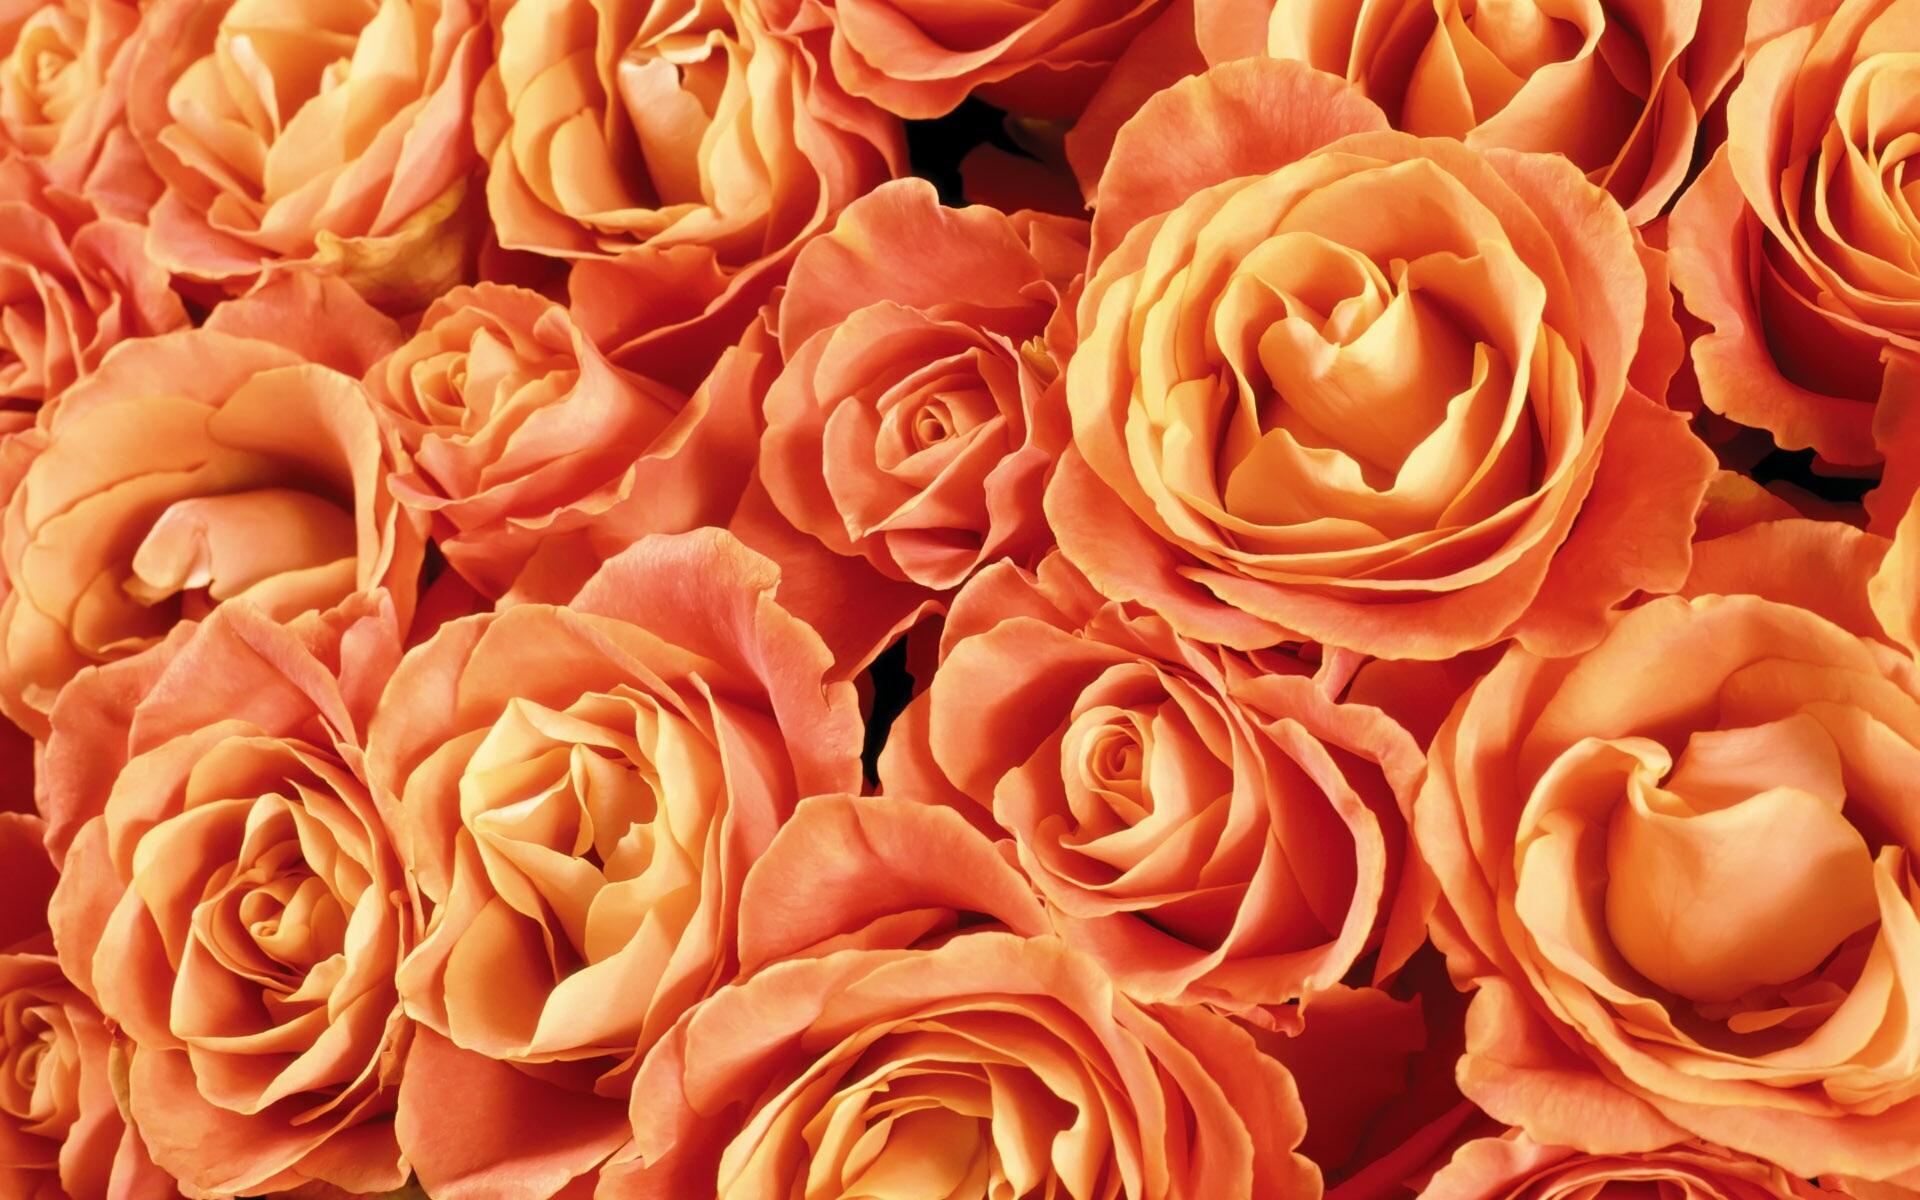 Orange Roses Backgrounds   Wallpaper High Definition High Quality